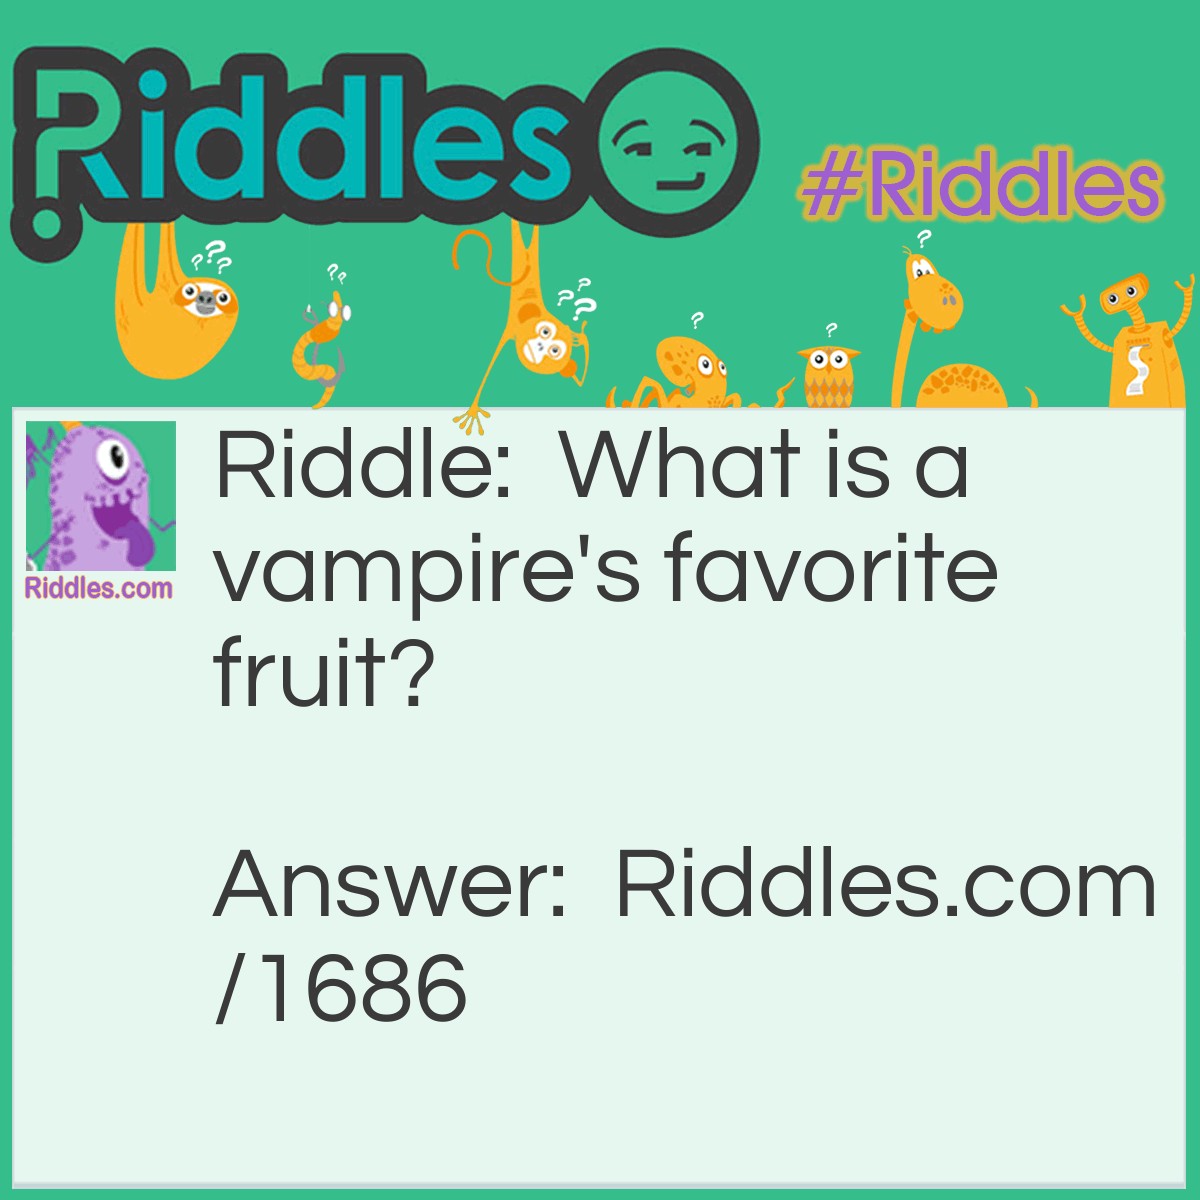 Riddle: What is a vampire's favorite fruit? Answer: A neck-tarine!